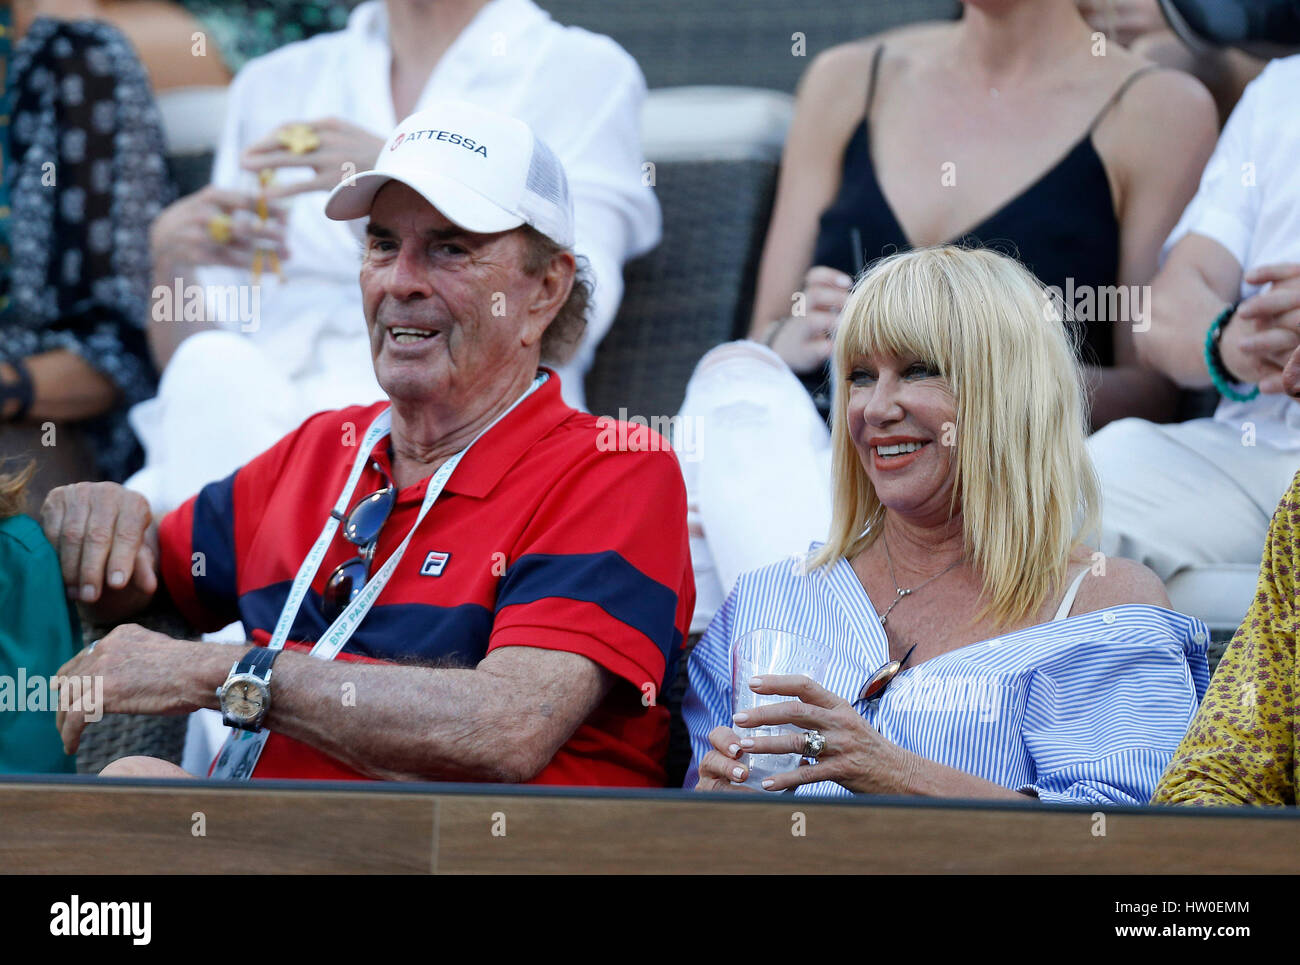 Indian Wells, California, USA. 15th March, 2017. Actress Suzanne Somers watches the tennis match between Rafael Nadal of Spain and Roger Federer of Switzerland during the 2017 BNP Paribas Open at Indian Wells Tennis Garden in Indian Wells, California. Charles Baus/CSM Credit: Cal Sport Media/Alamy Live News Stock Photo